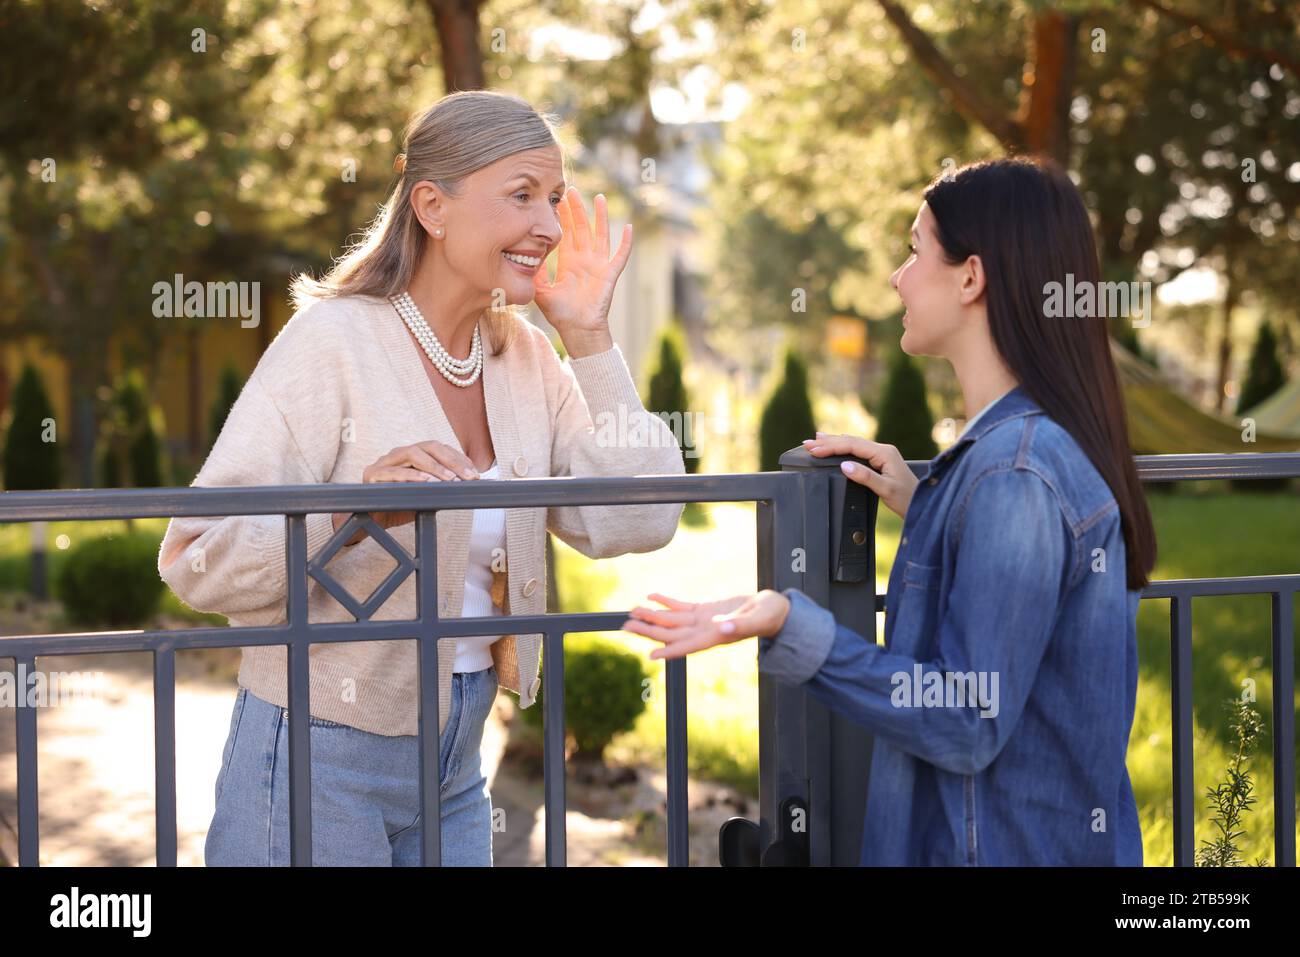 Friendly relationship with neighbours. Happy women talking near fence outdoors Stock Photo